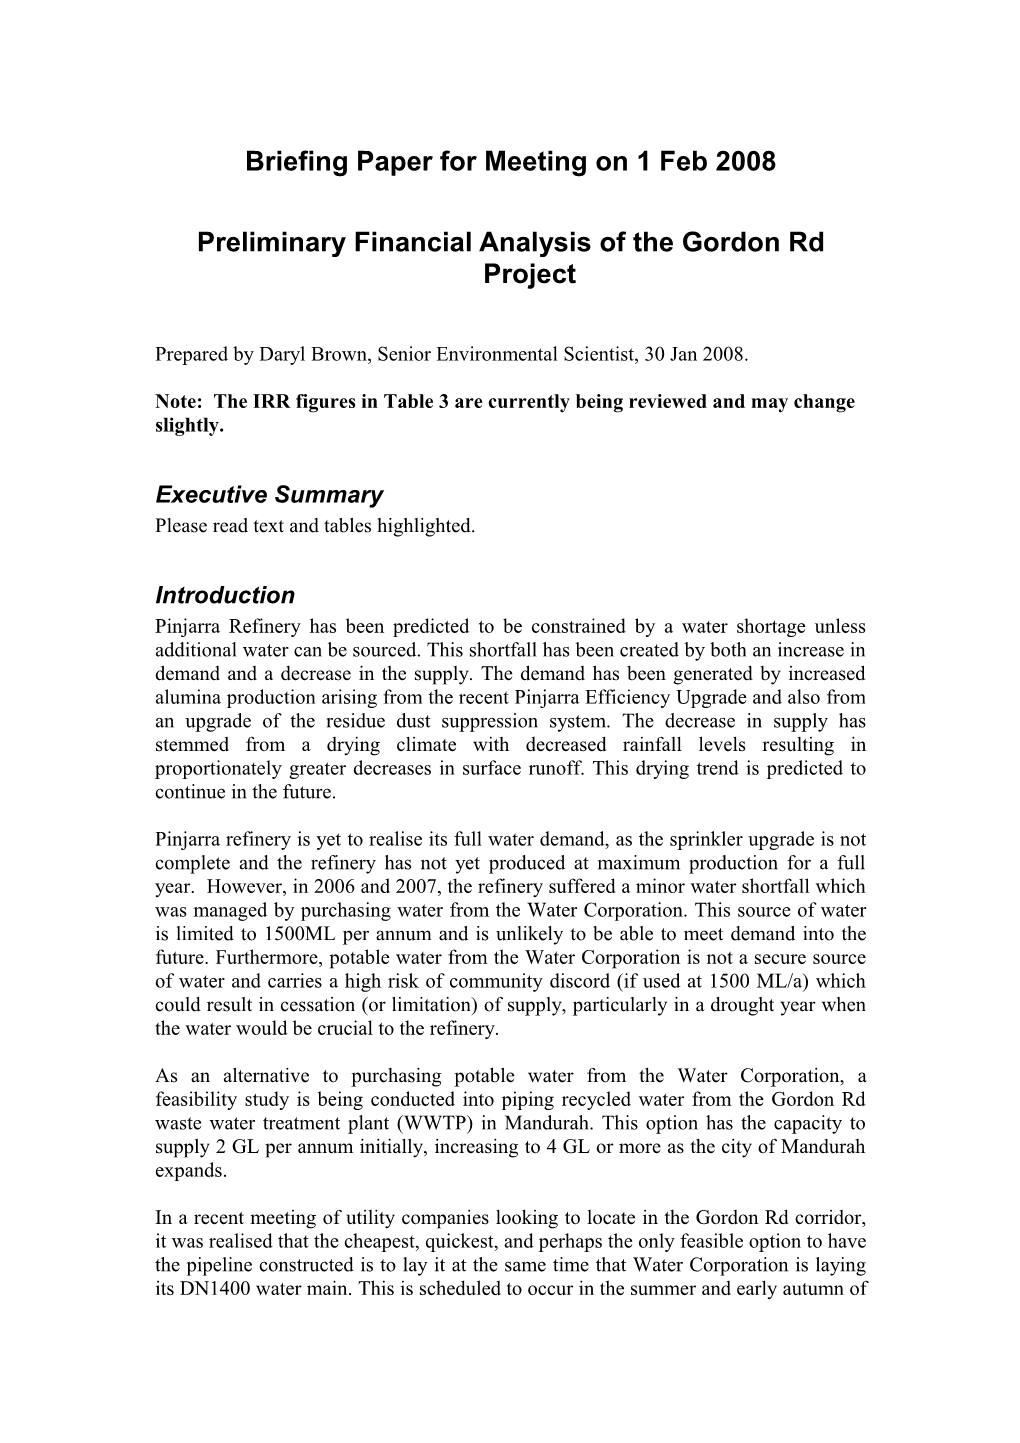 Preliminary Financial Analysis of the Gordon Rd Project